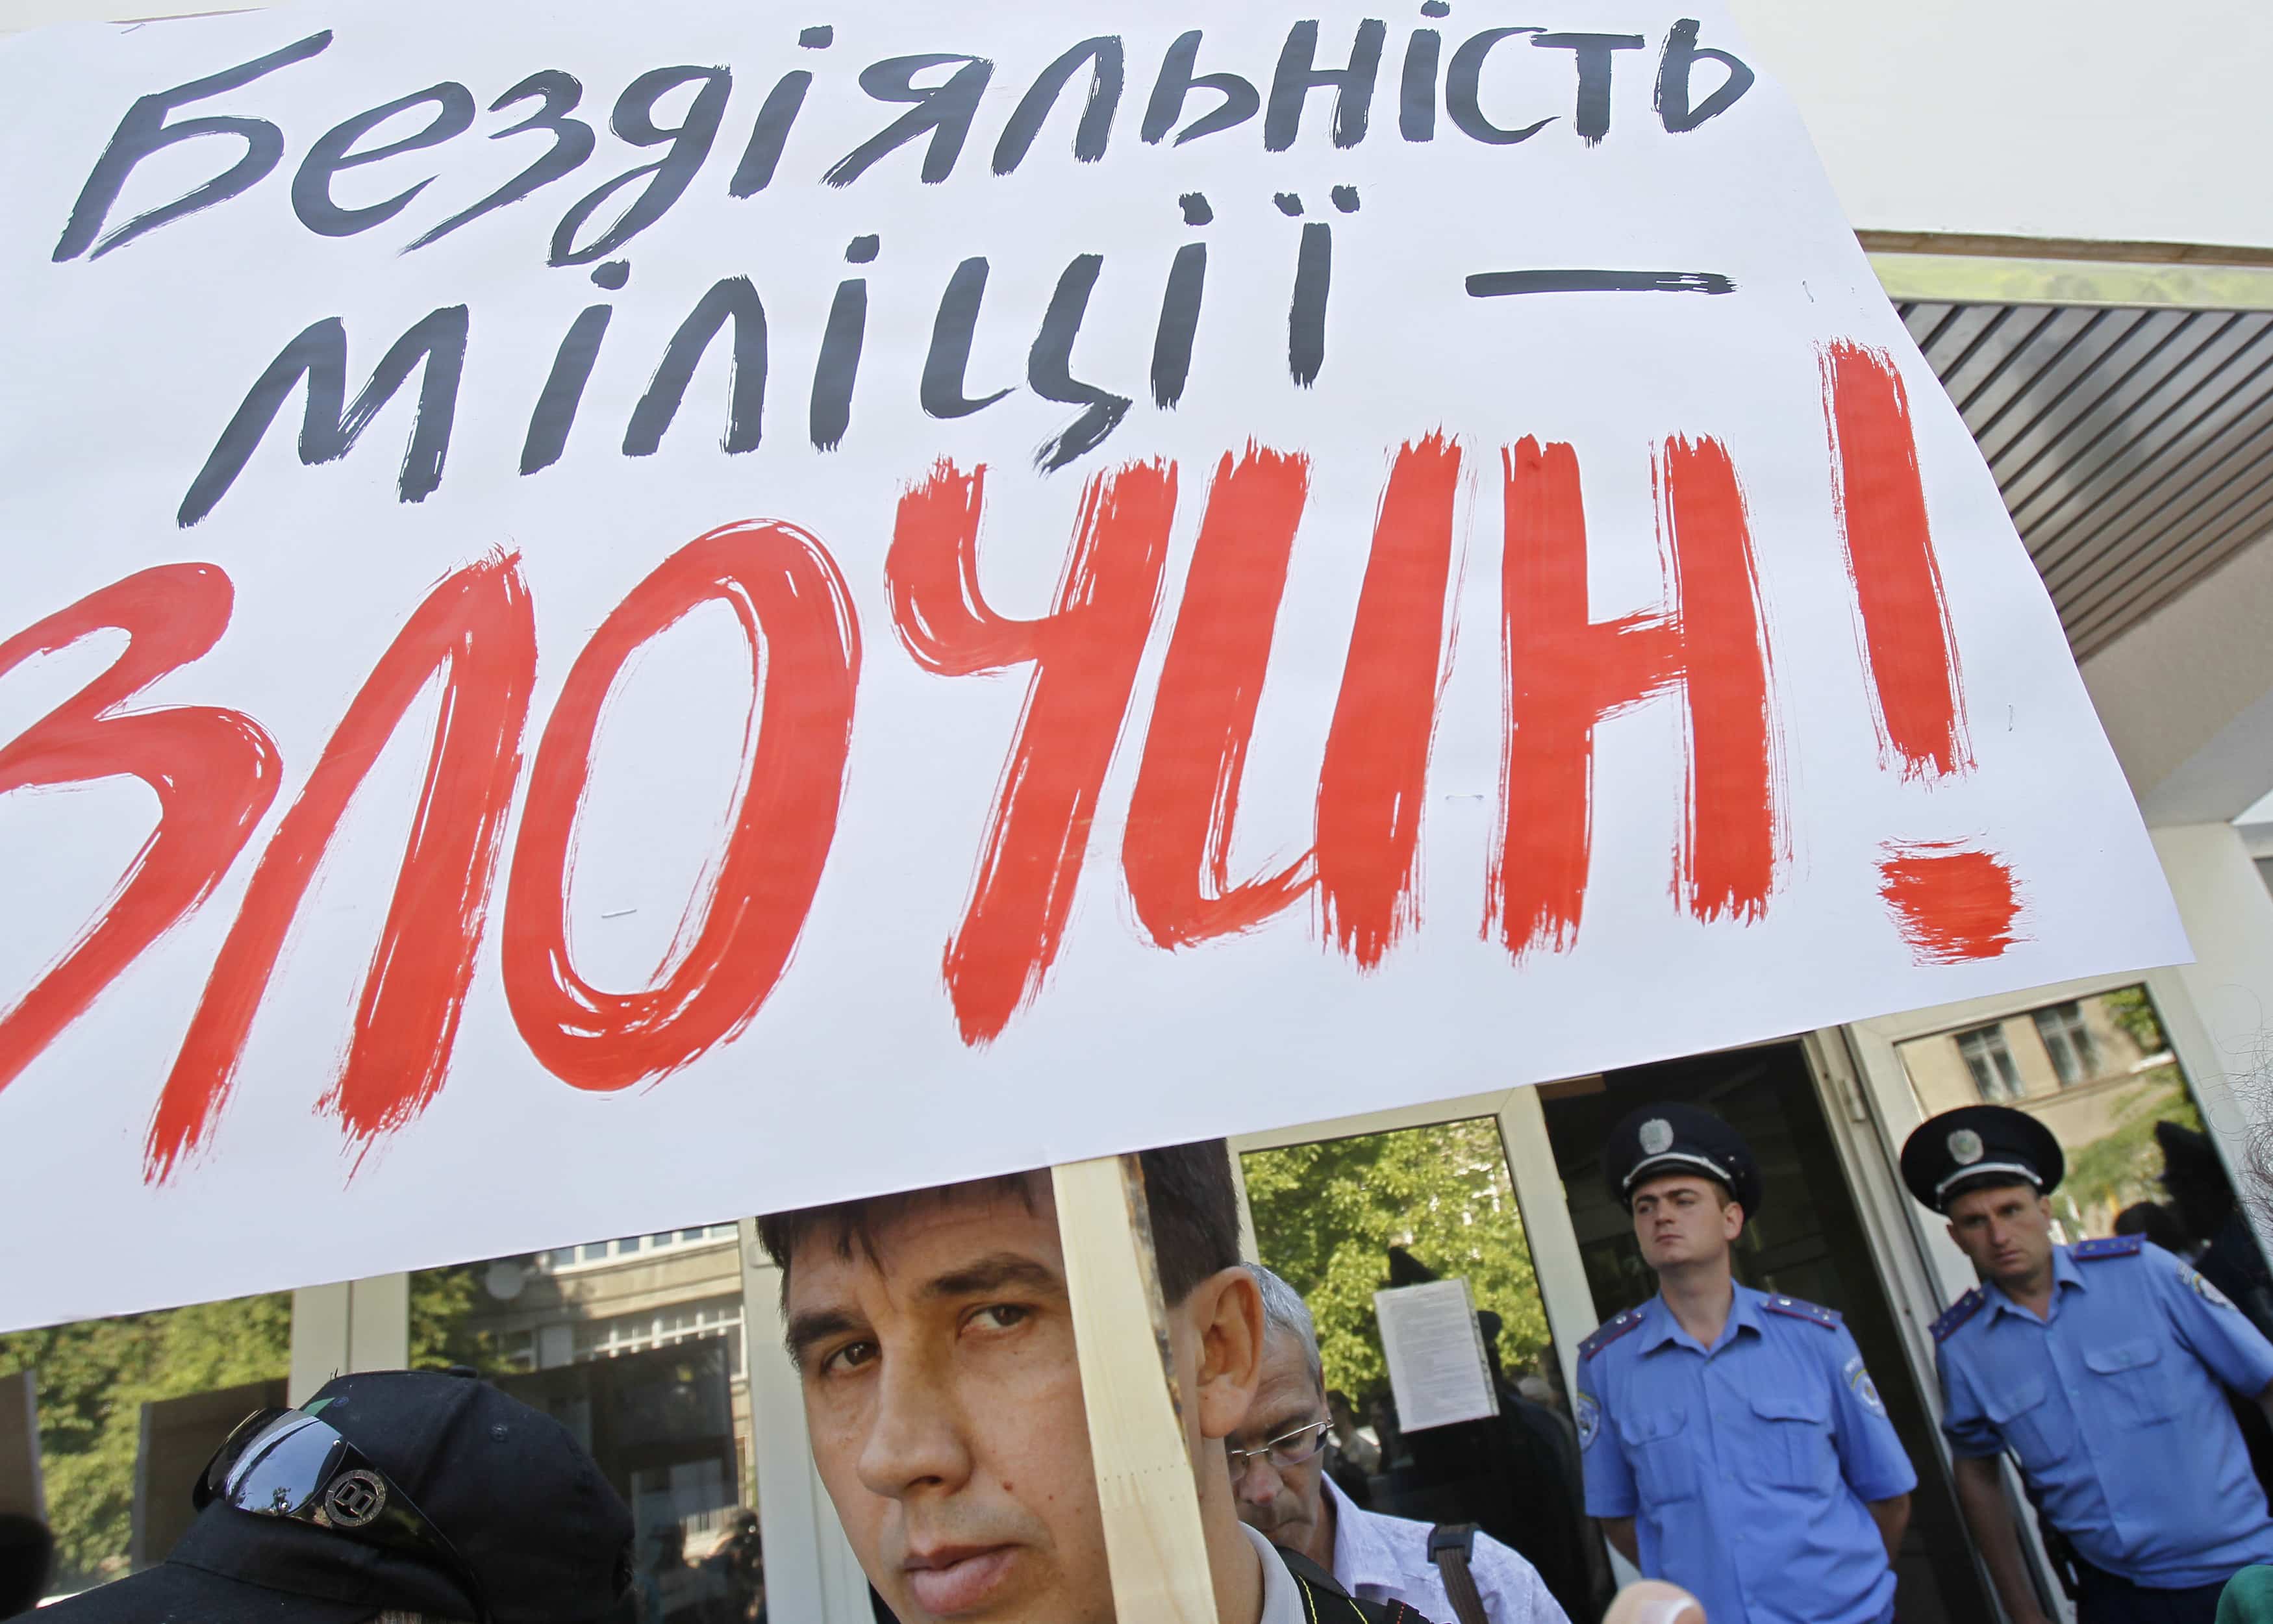 An Ukrainian journalist holds up a sign during a rally in front of the Interior Ministry, to demand for the urgent investigation of an attack on local reporters, in Kiev 20 May 2013., REUTERS/Gleb Garanich